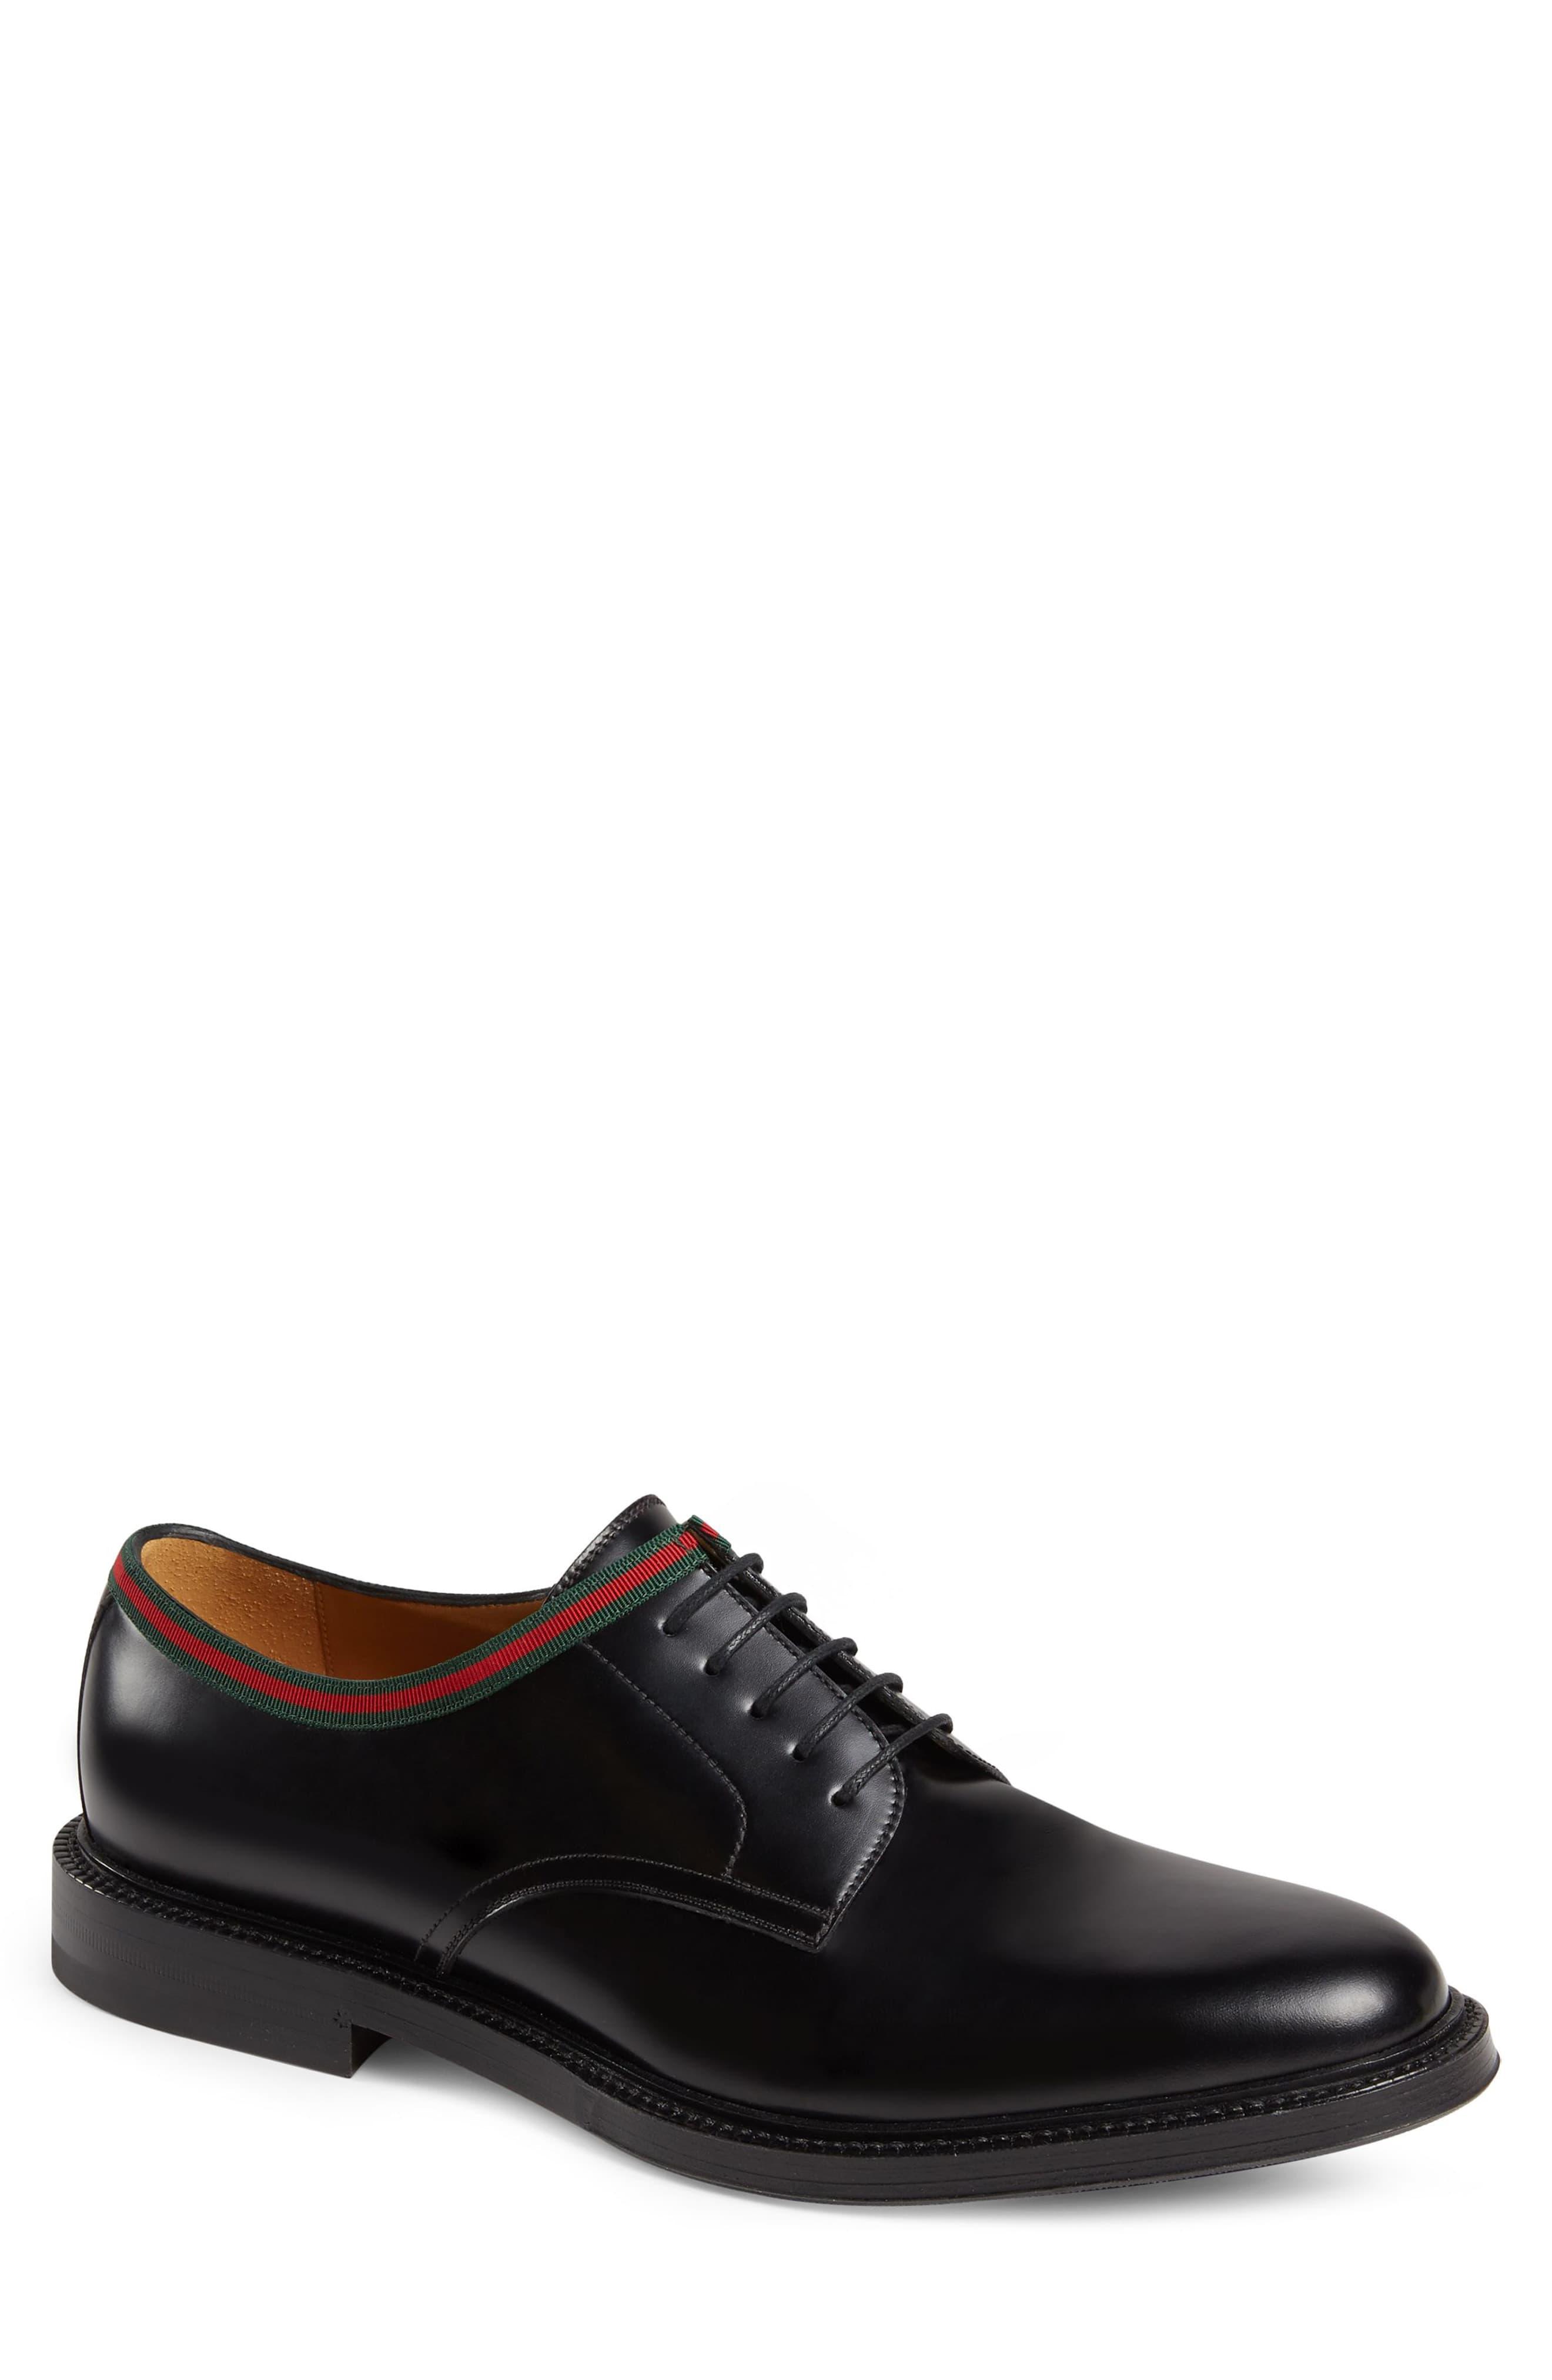 Gucci 15mm Leather Lace-up Derby Shoes in Nero (Black) for Men - Lyst